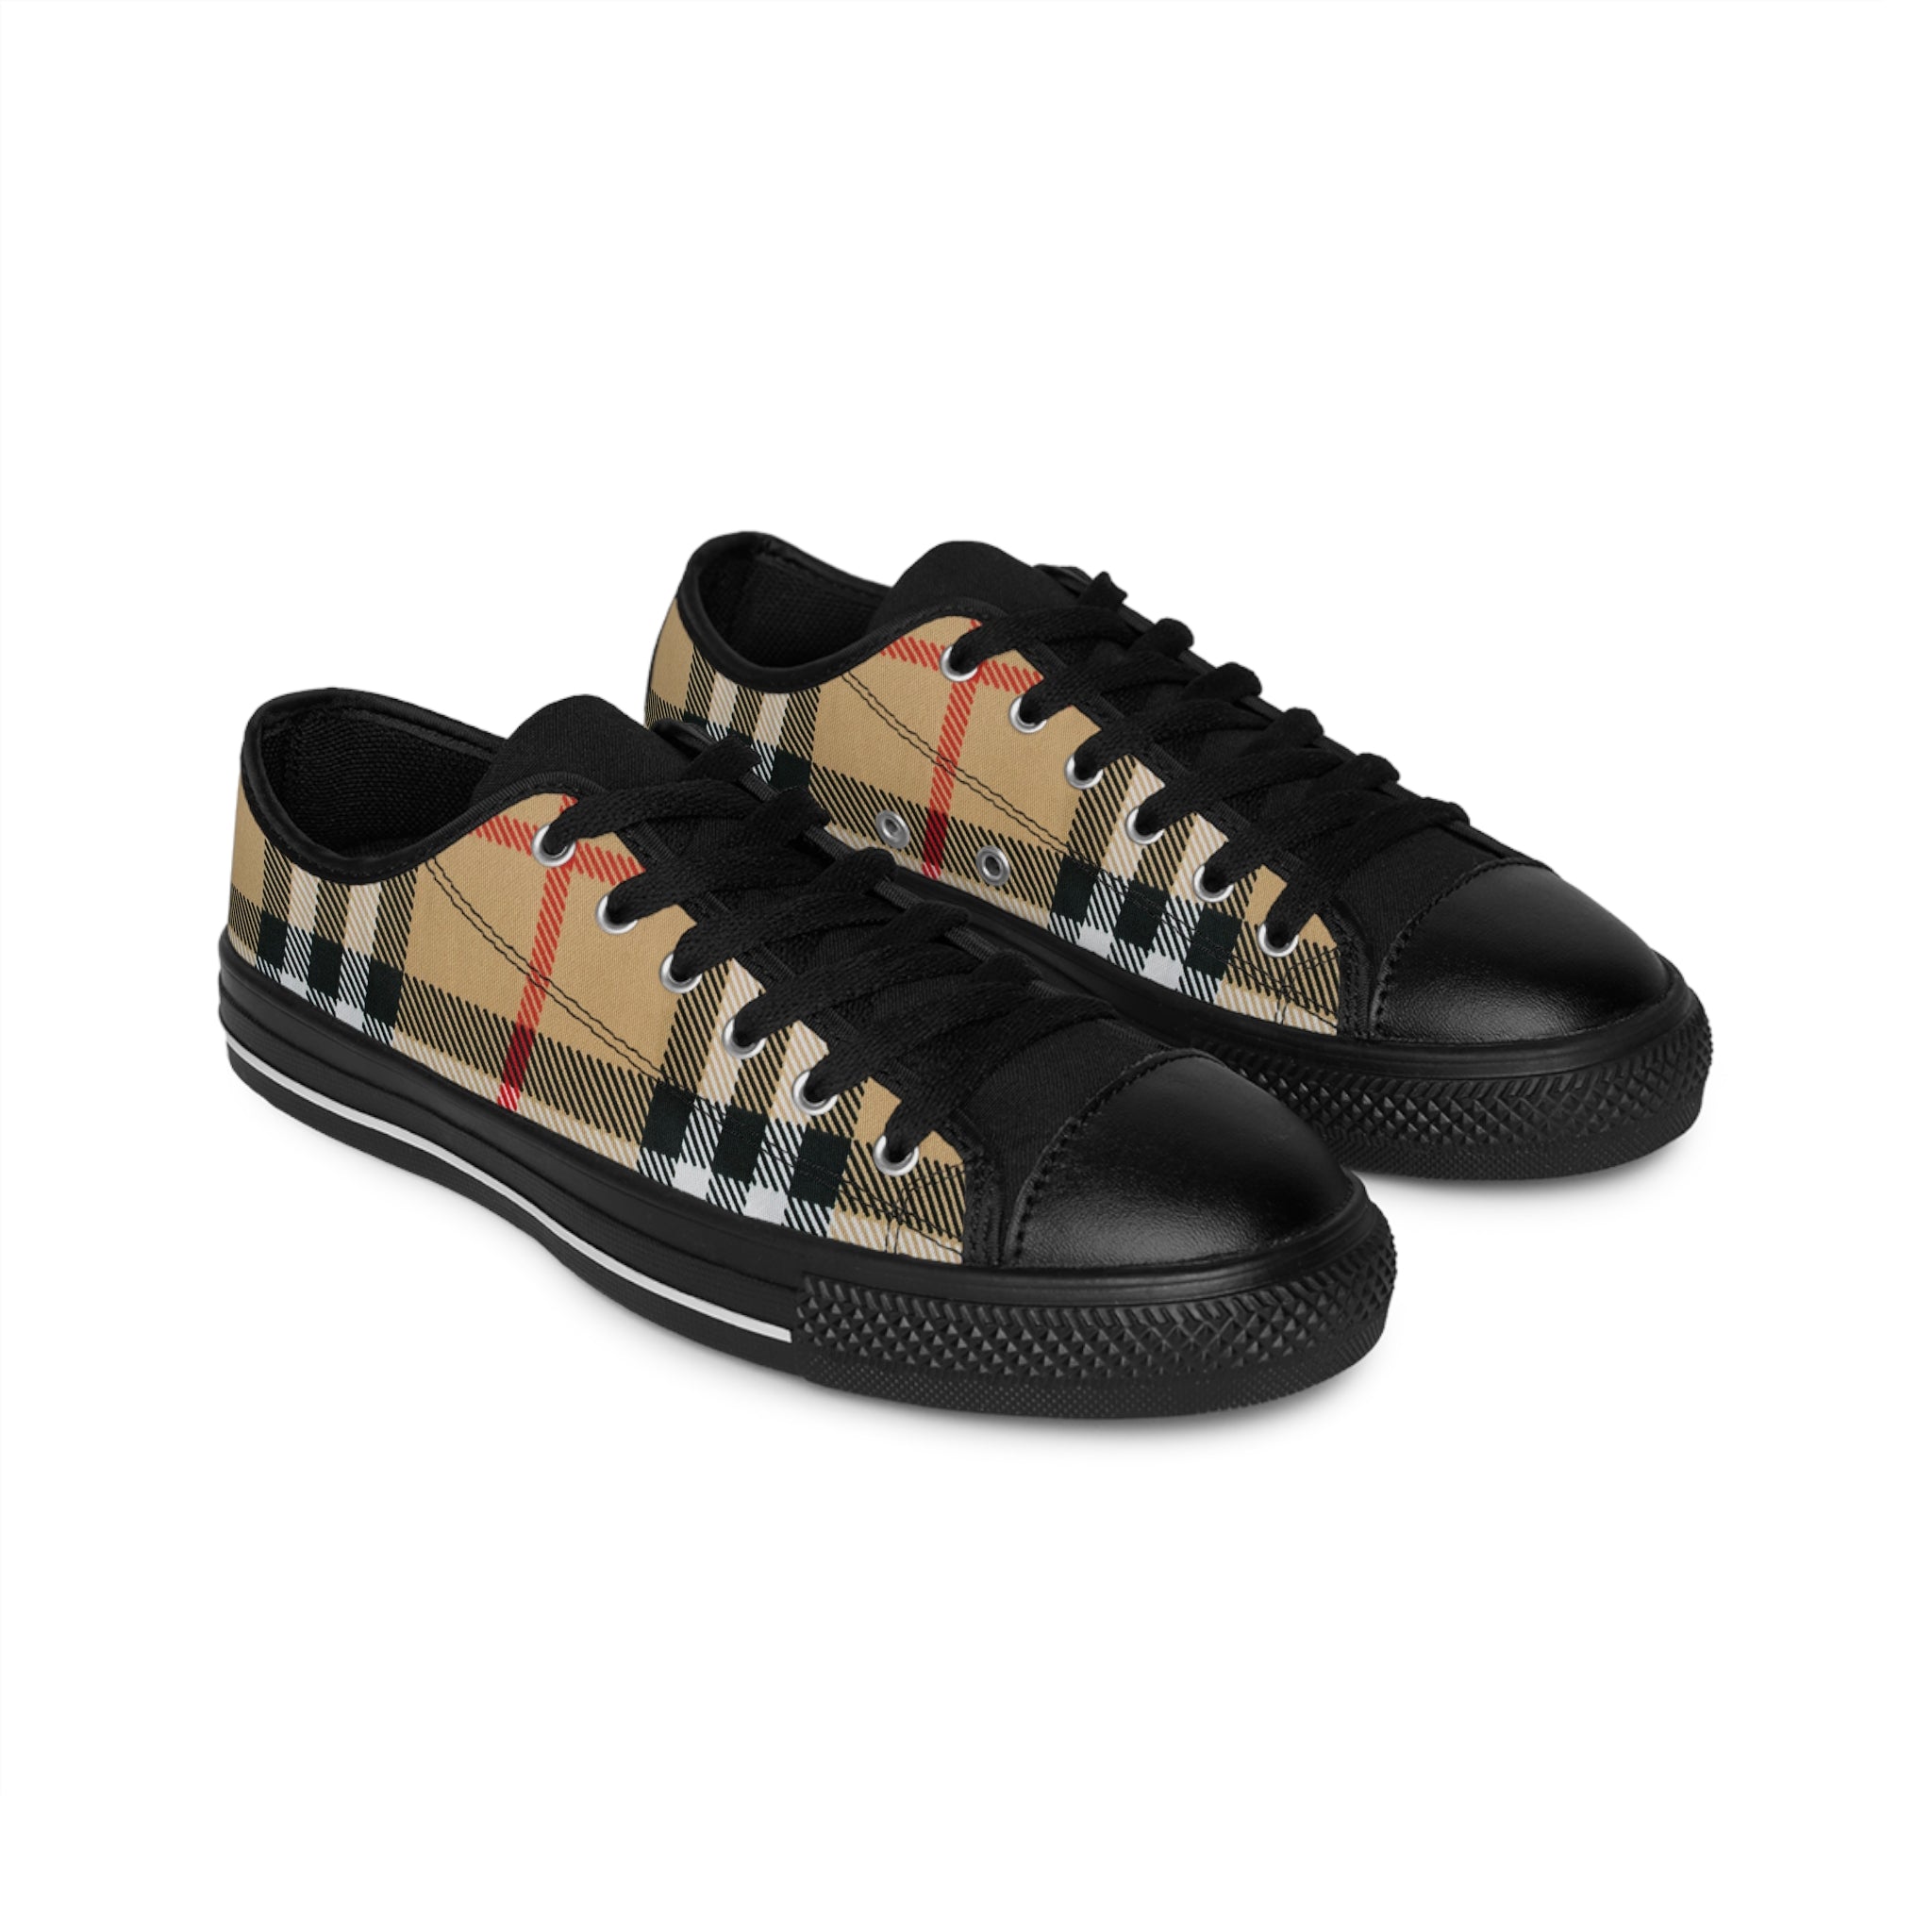  Groove Fashion Collection in Dark Plaid Men's Low Top Canvas Shoes, Men's Casual Shoes Sneakers